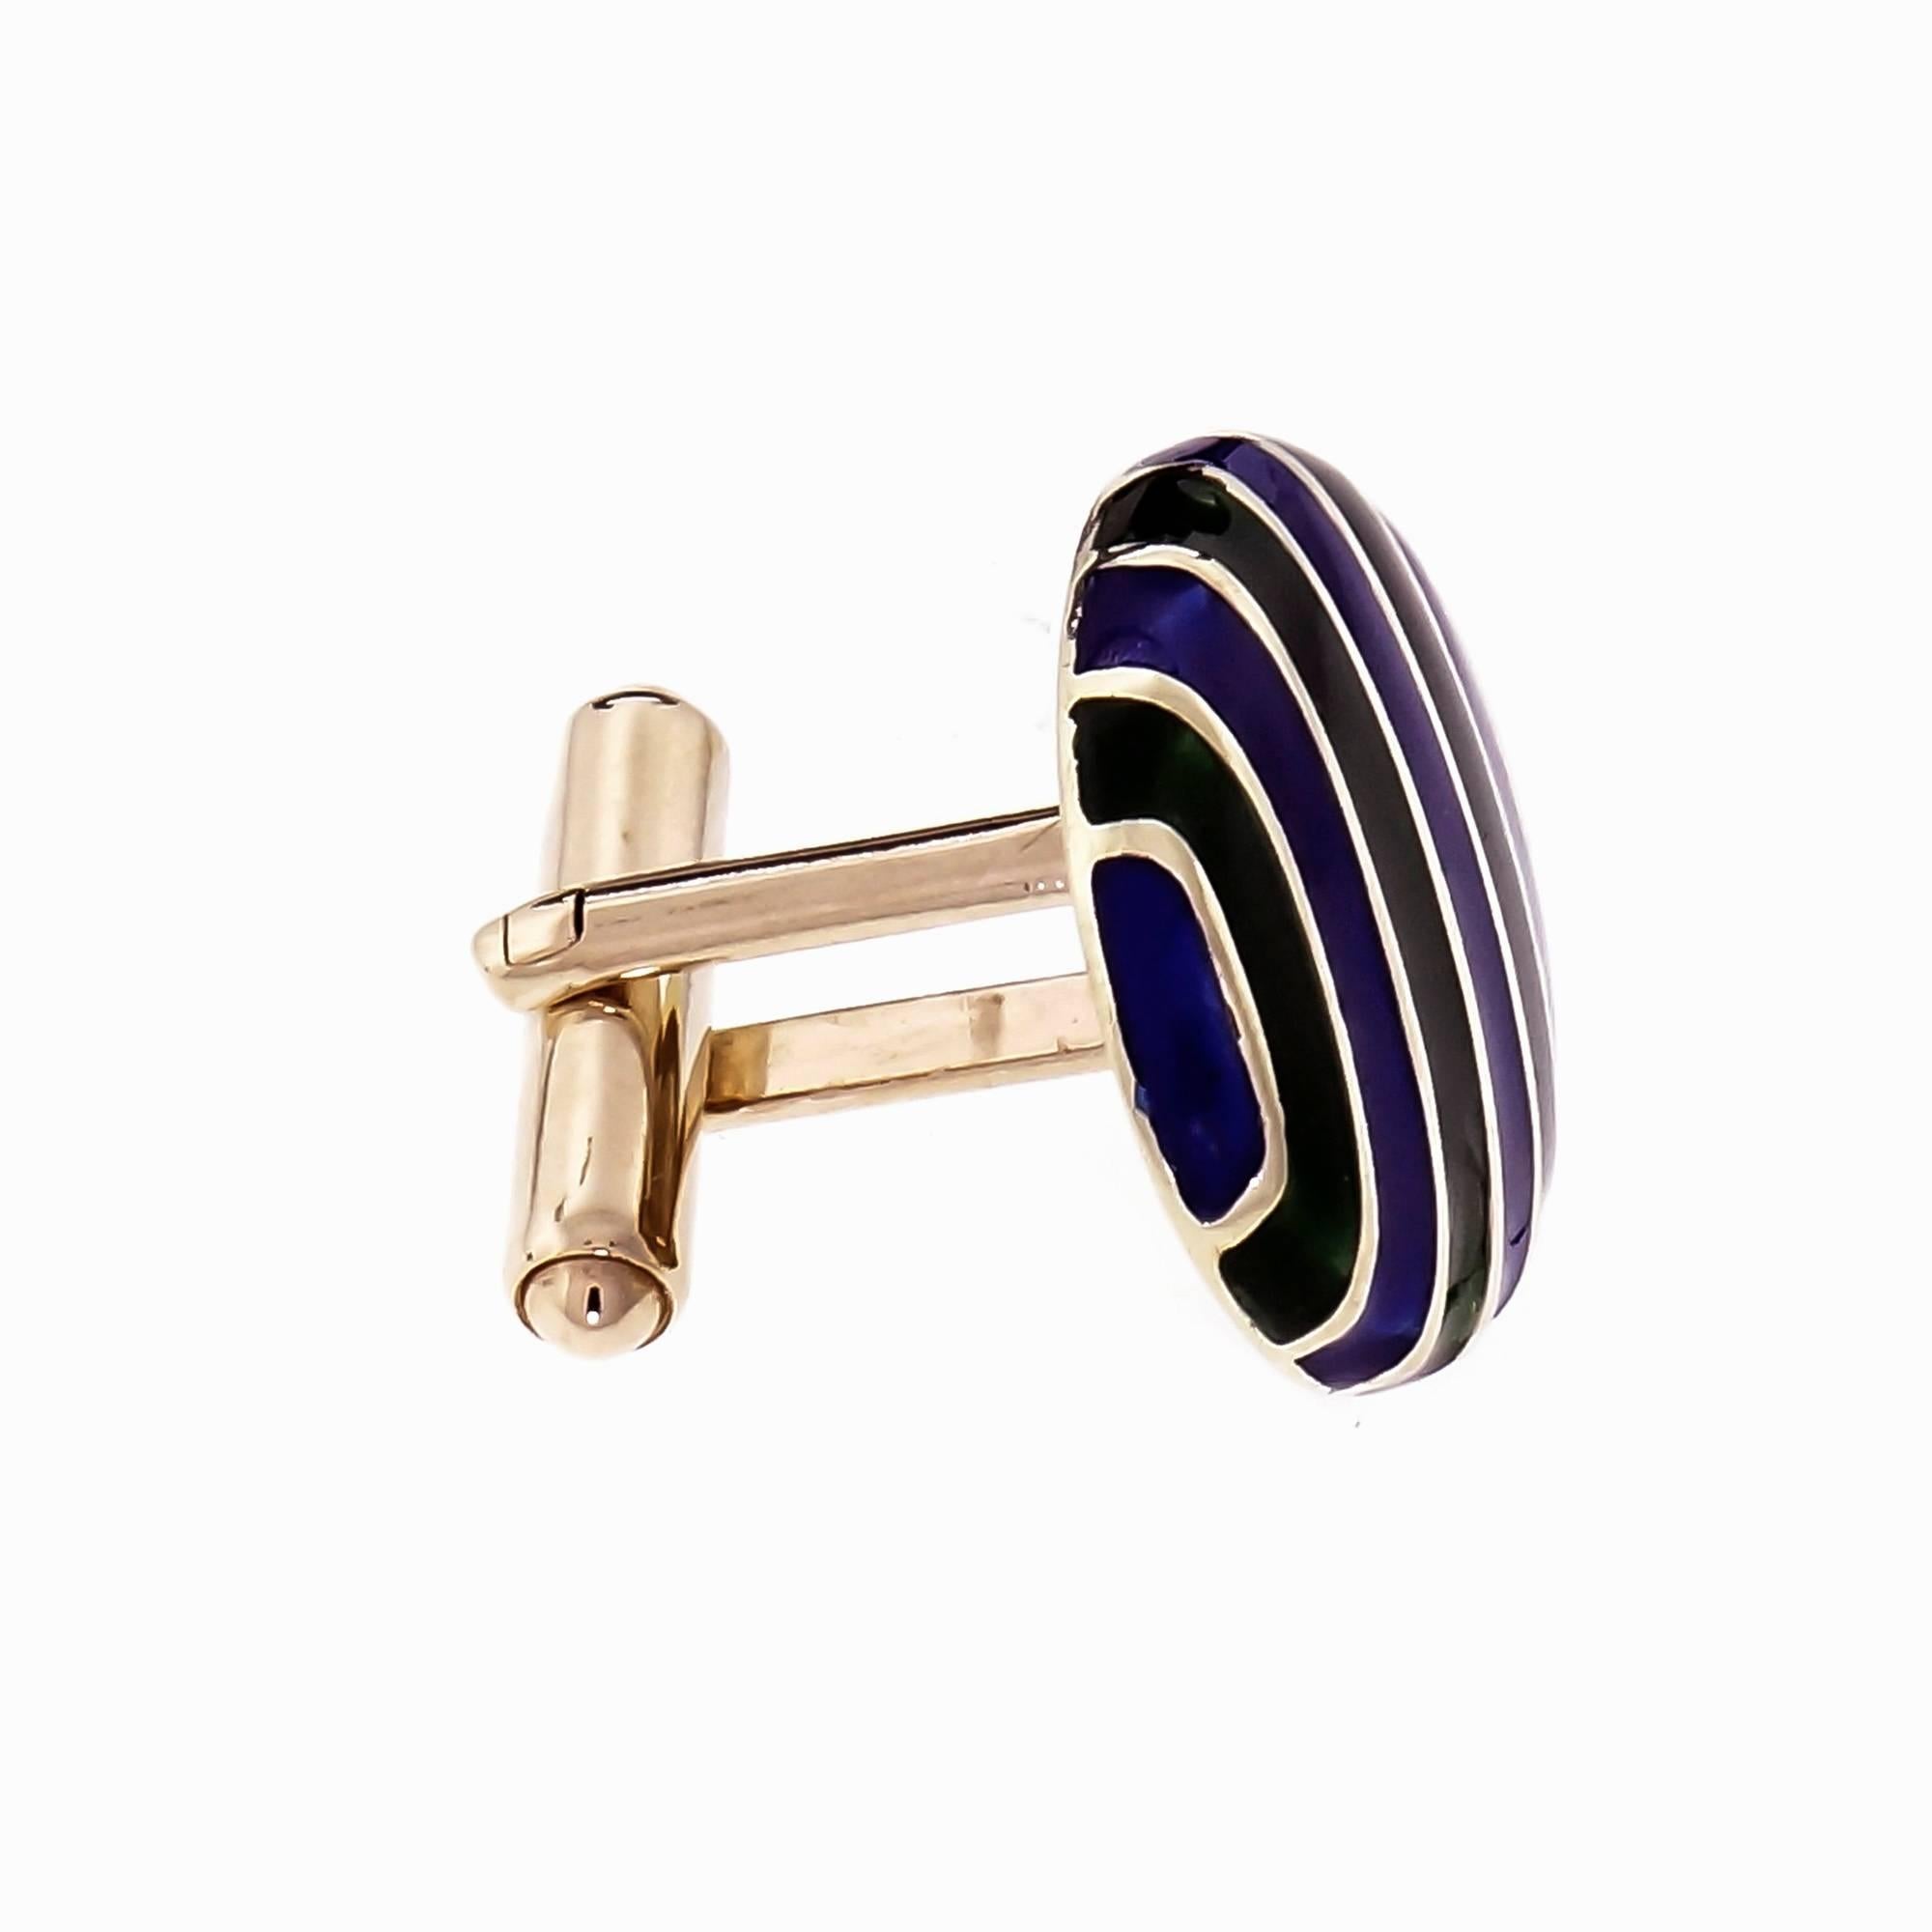 Vintage KBJC oval blue and green enamel striped cufflinks in solid 14k yellow gold with secure clip backs.

14k yellow gold
3.4 grams
Tested and stamped: 14k
Hallmark: KBJC
Top to bottom: 17.41mm or .69 inch
Width: 22.22mm or .88 inch
Depth: 4.34mm
